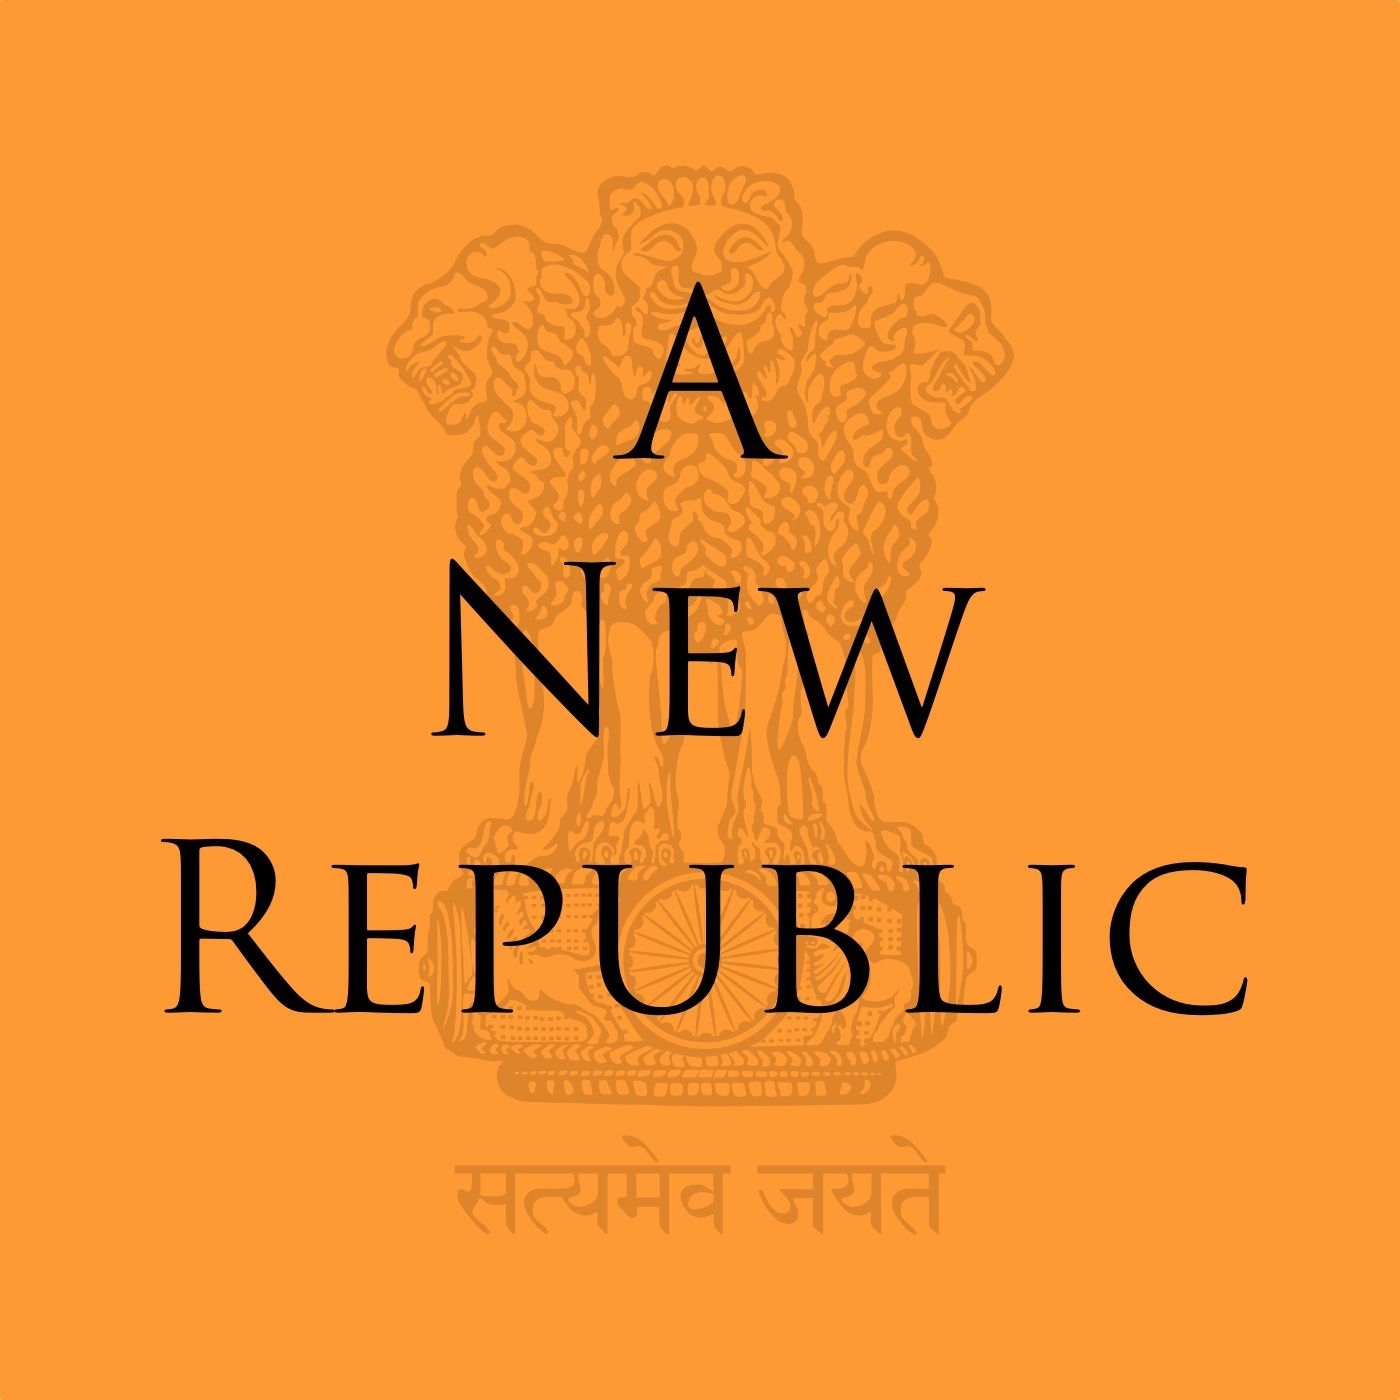 A New Republic - Episode 14: An Imperial Masterpiece